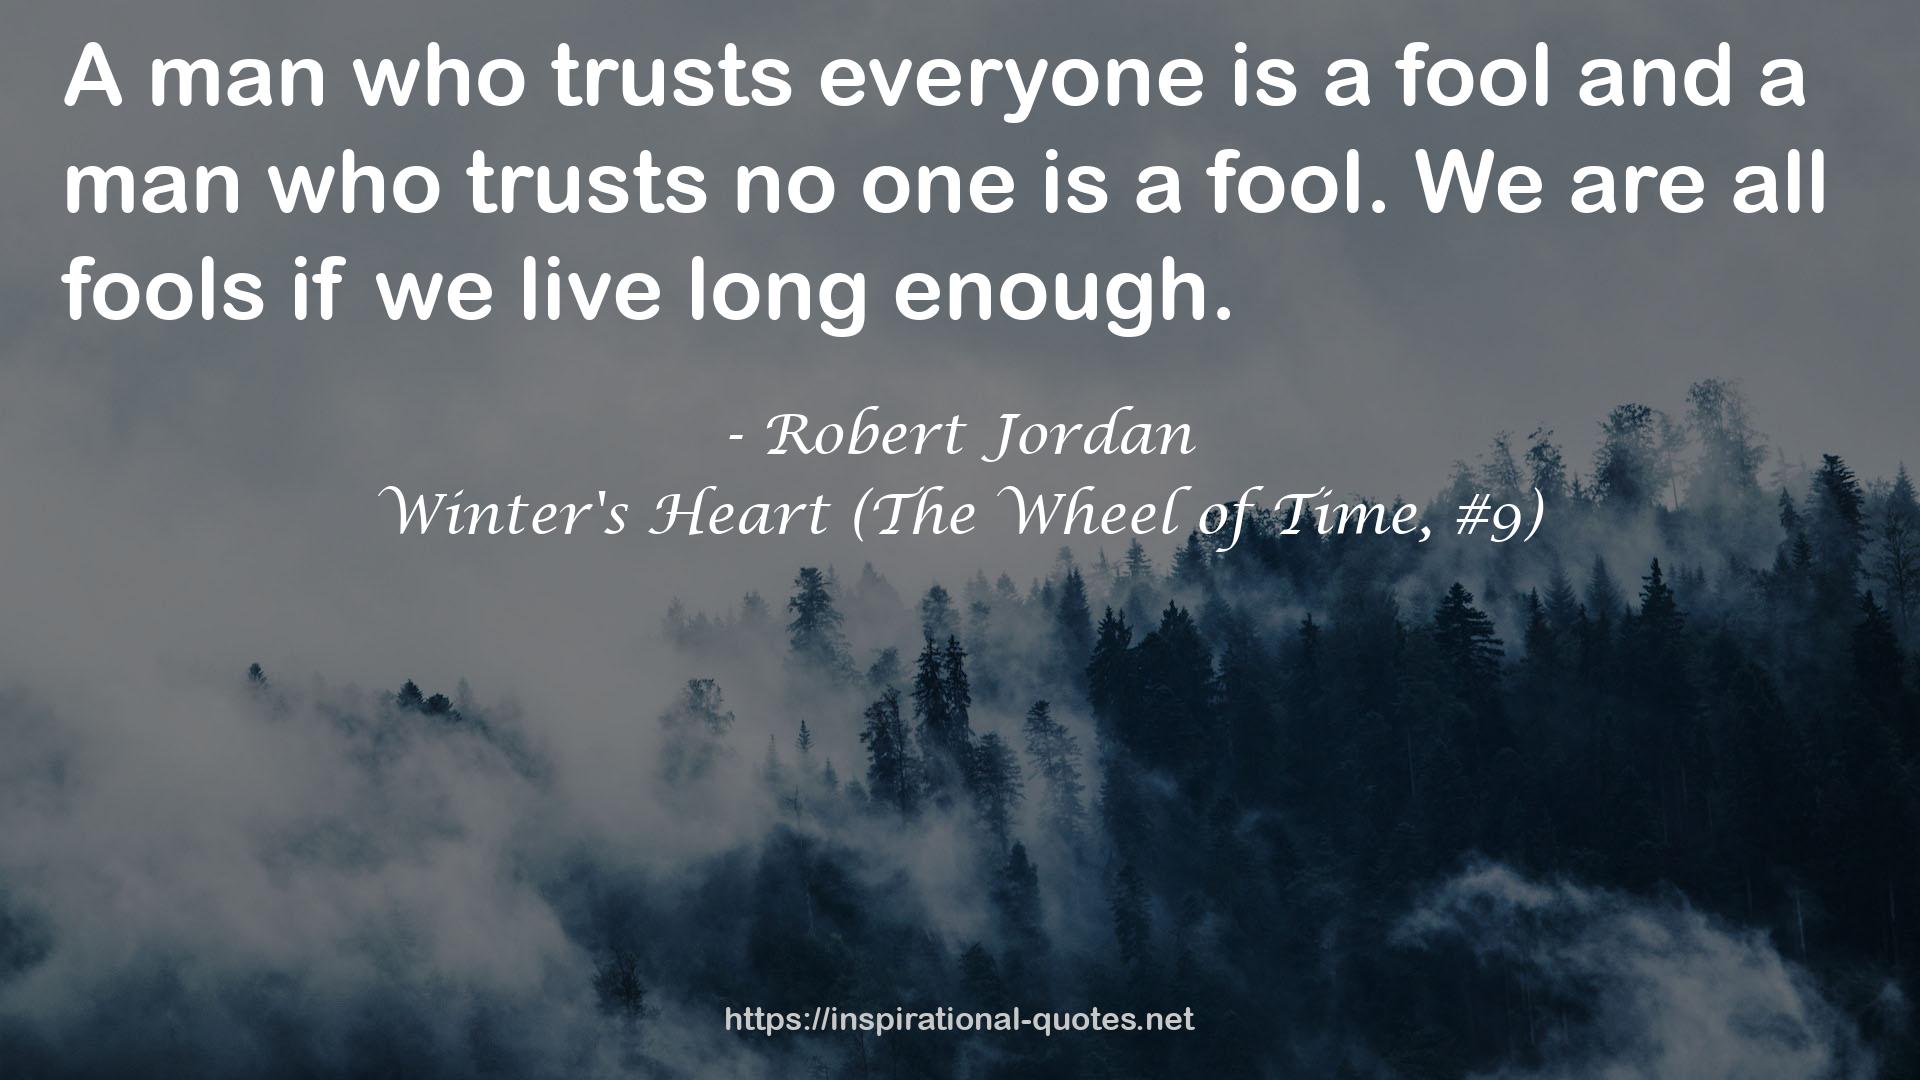 Winter's Heart (The Wheel of Time, #9) QUOTES